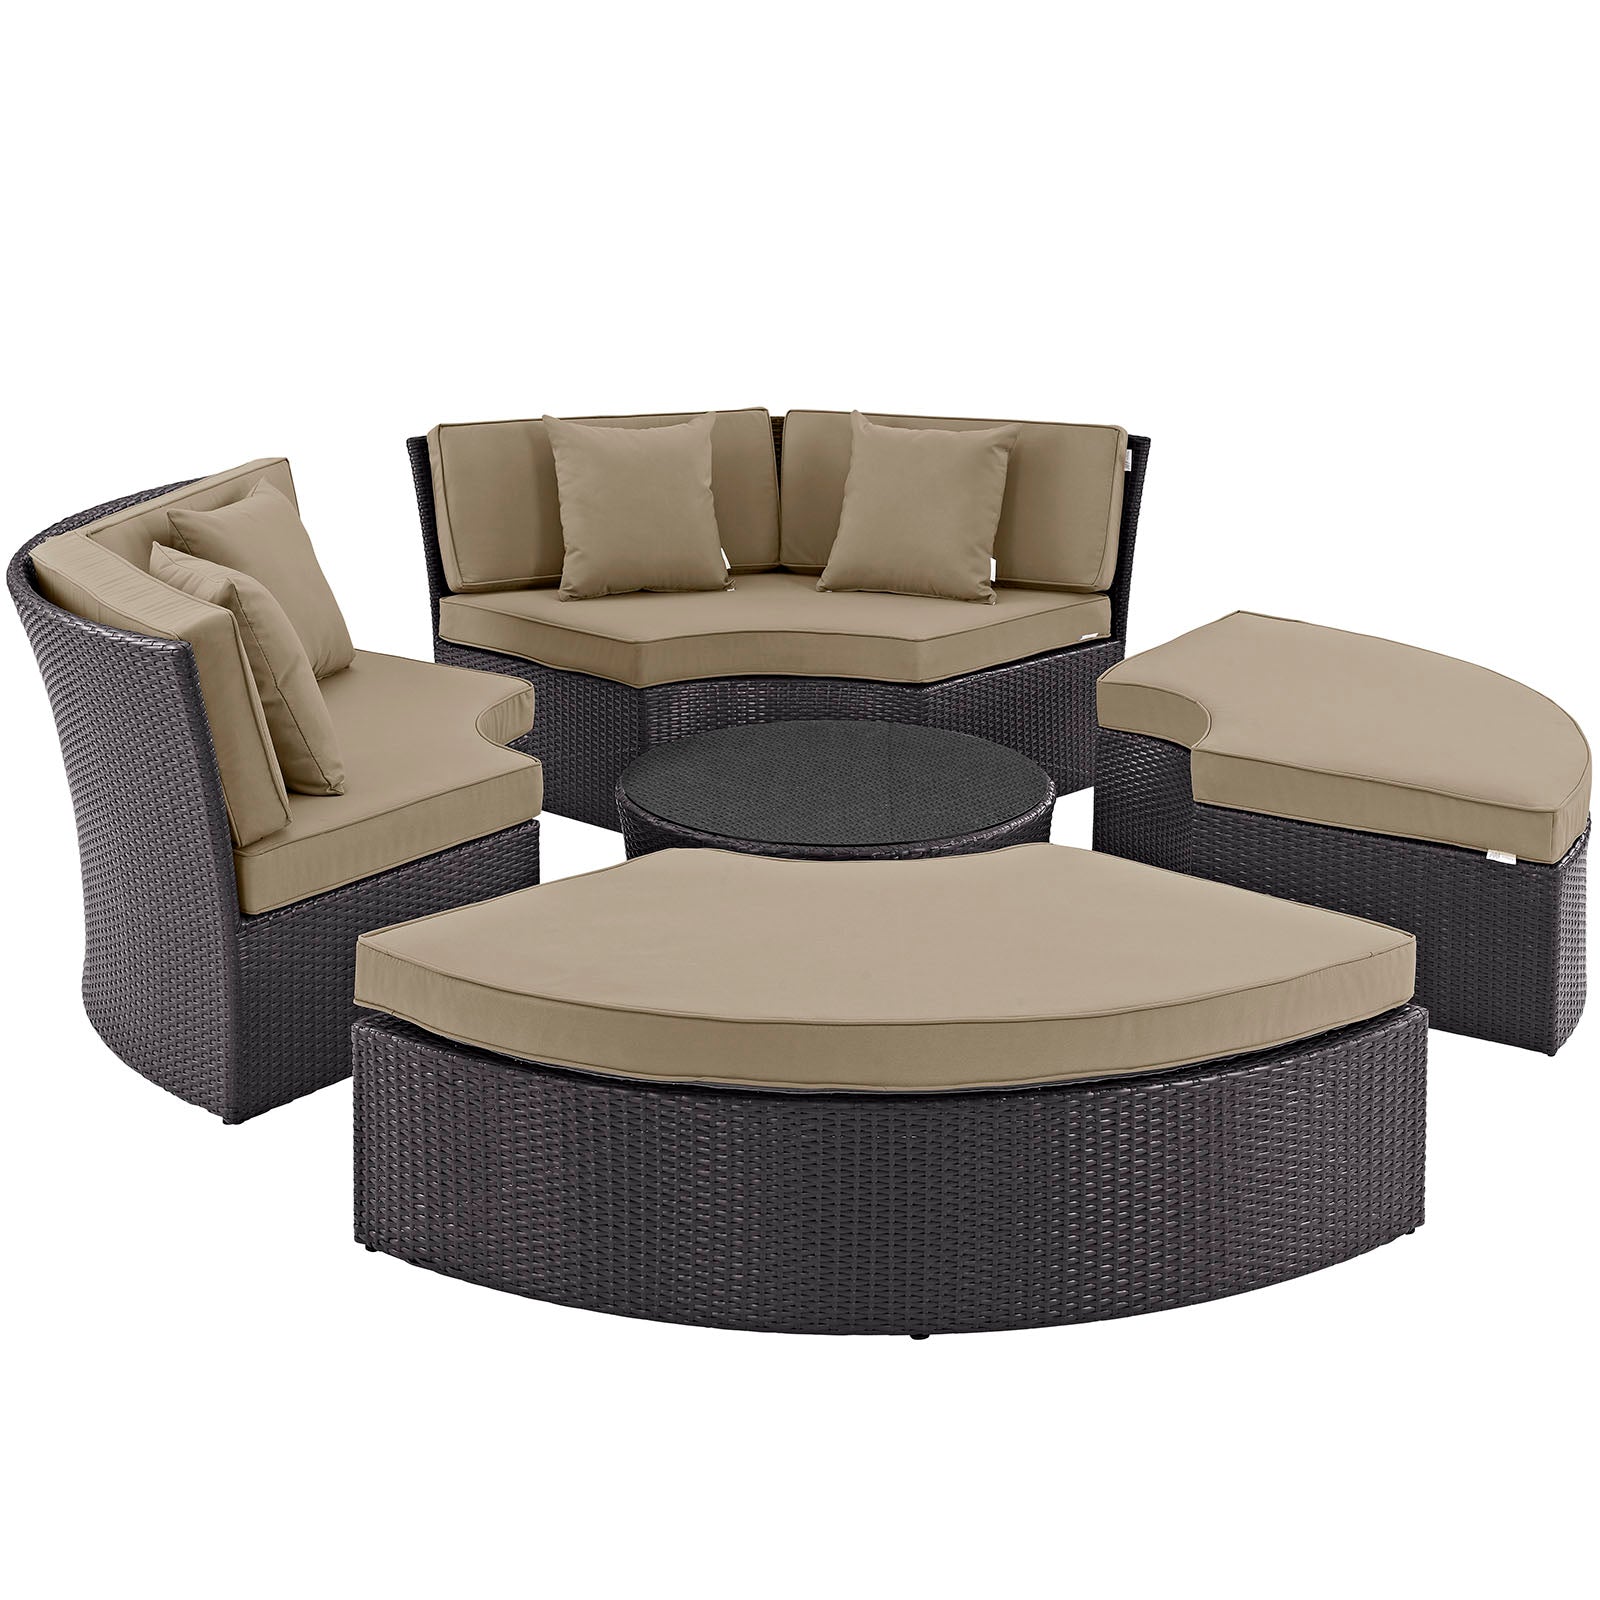 Convene Circular Outdoor Patio Daybed Set-Outdoor Bed-Modway-Wall2Wall Furnishings